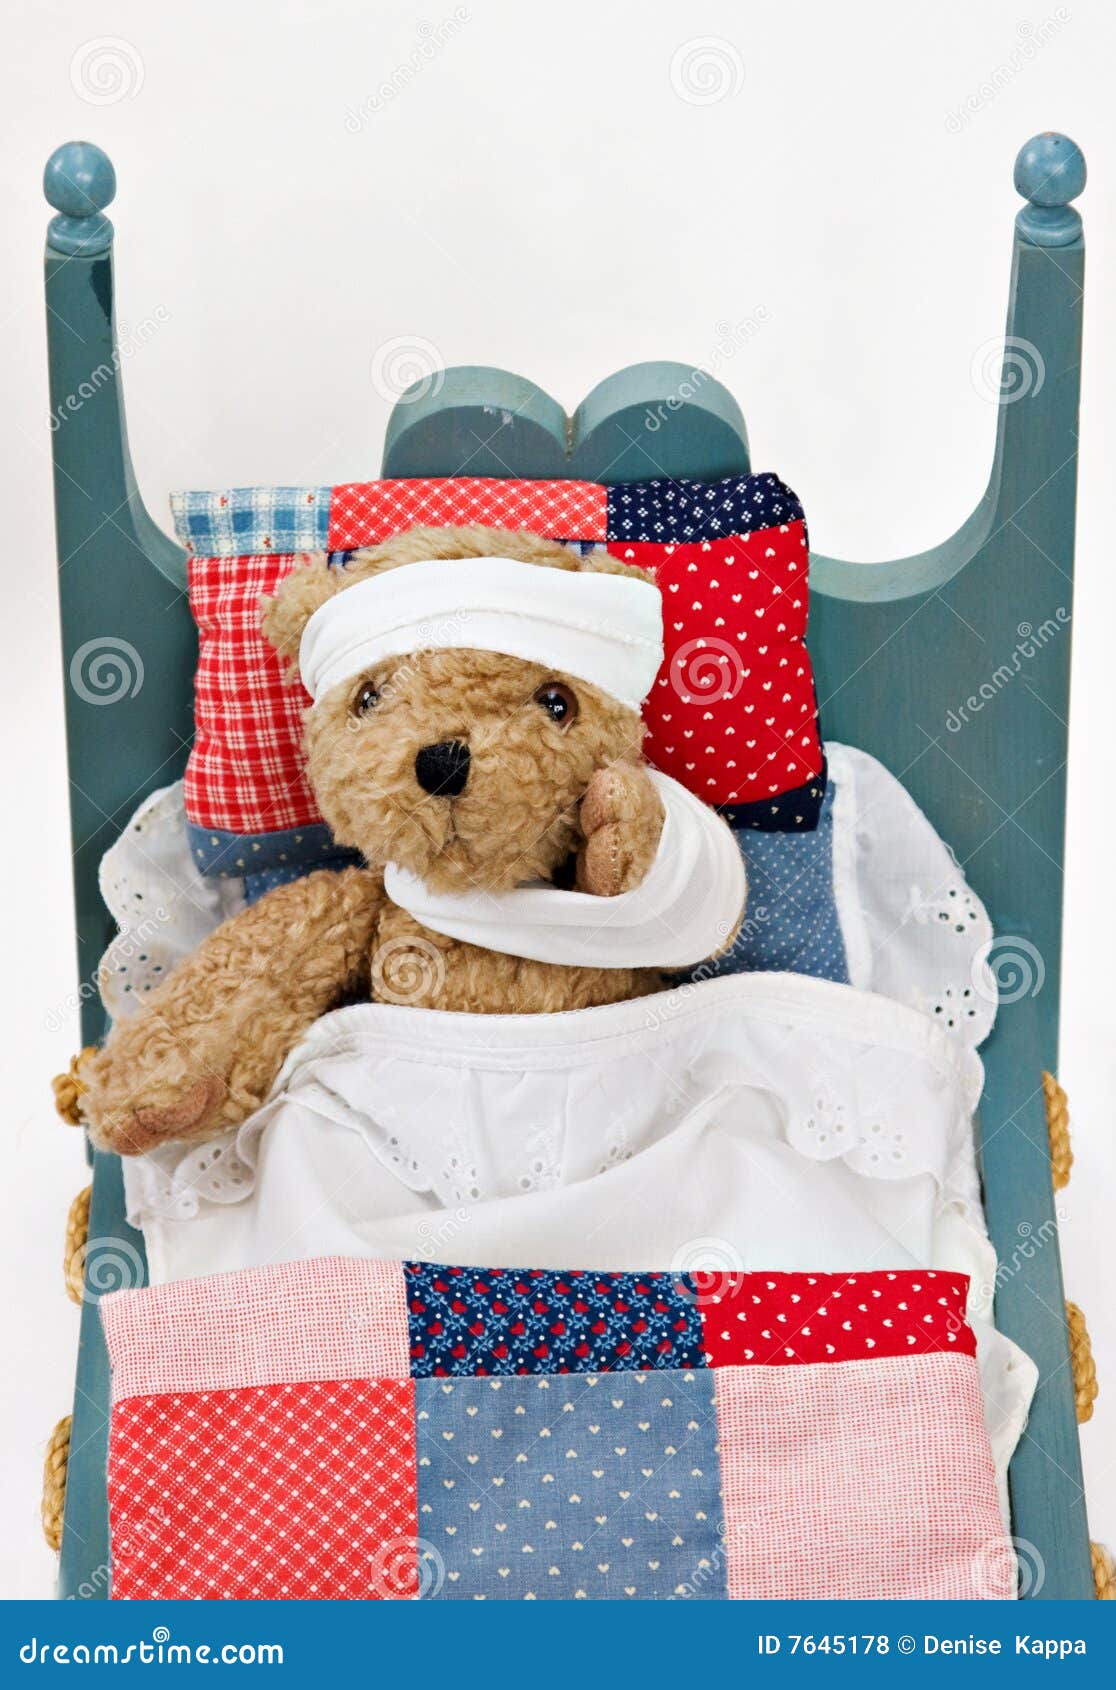 161 Get Well Soon Bear Images, Stock Photos, 3D objects, & Vectors